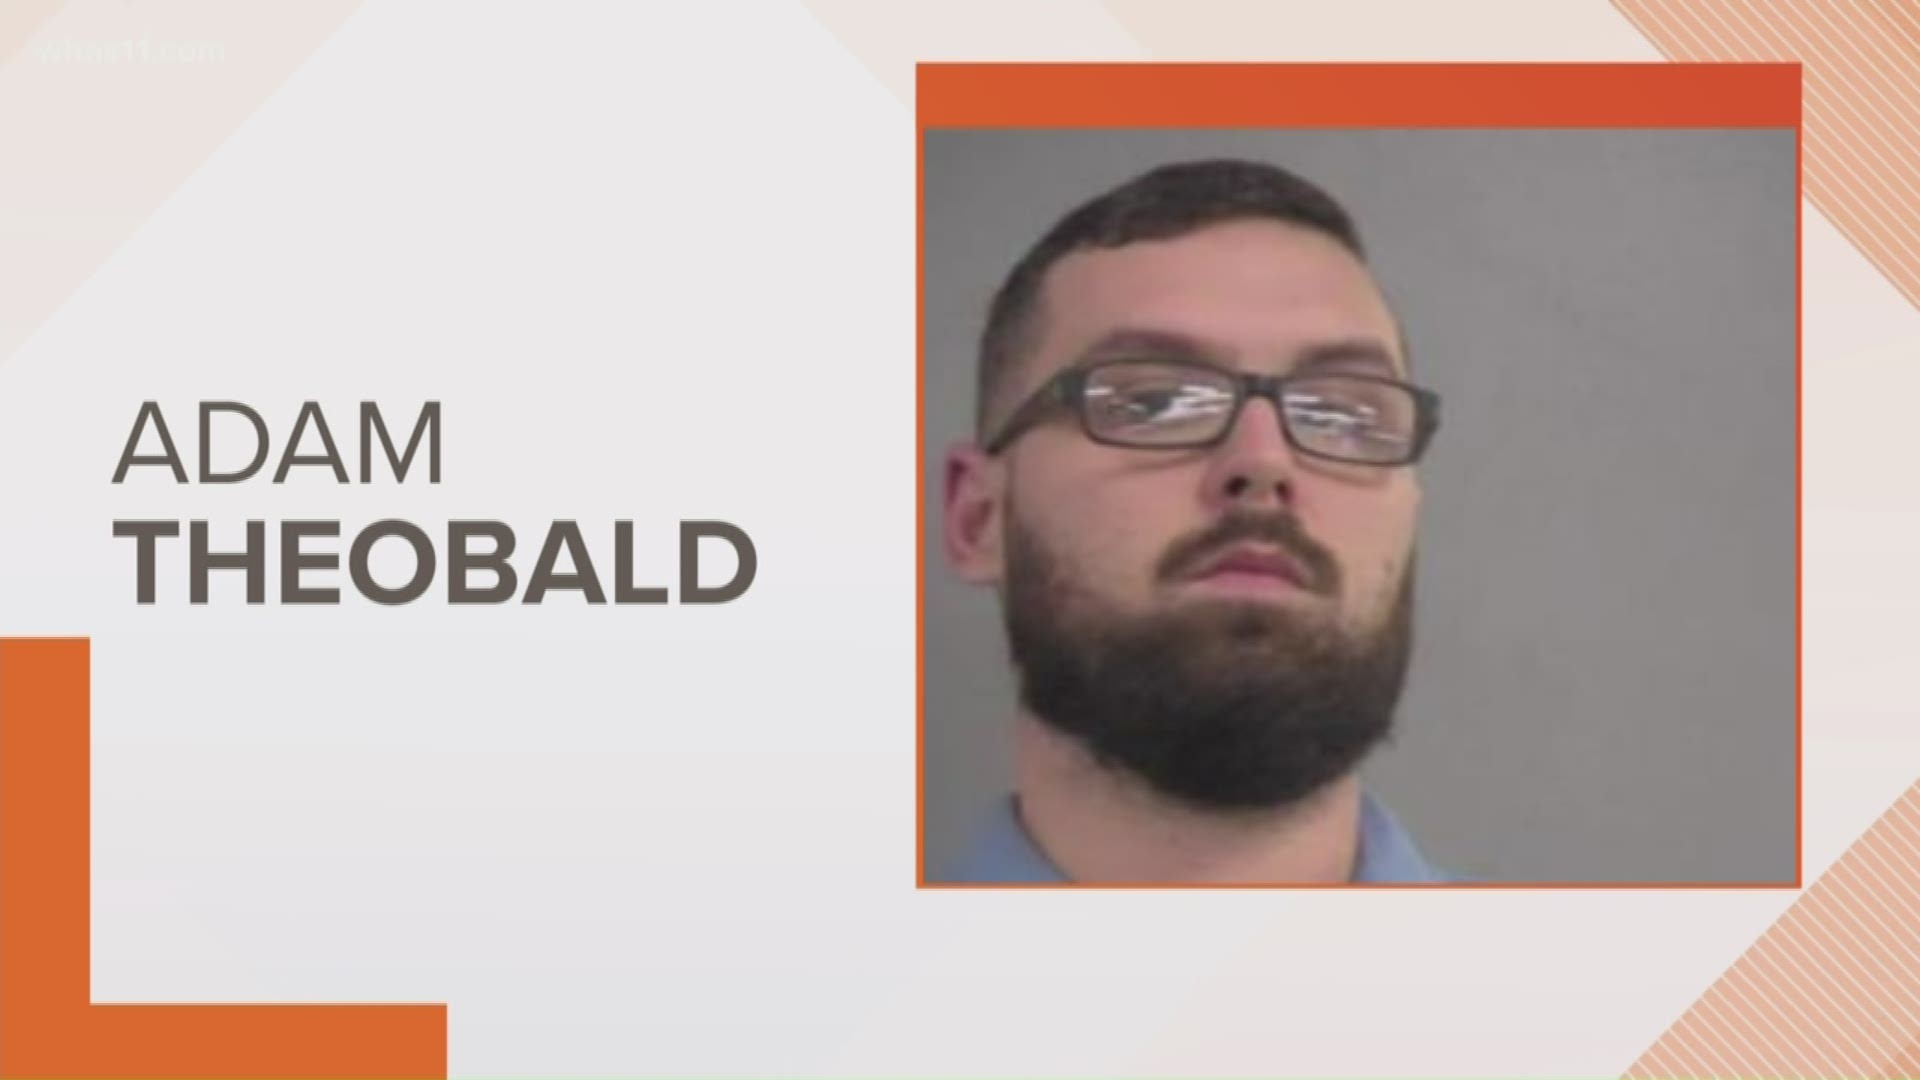 Adam Theobald admitted to police that he stole $8,000 worth of lottery tickets from the Circle K on LaGrange Road over a four-month period.